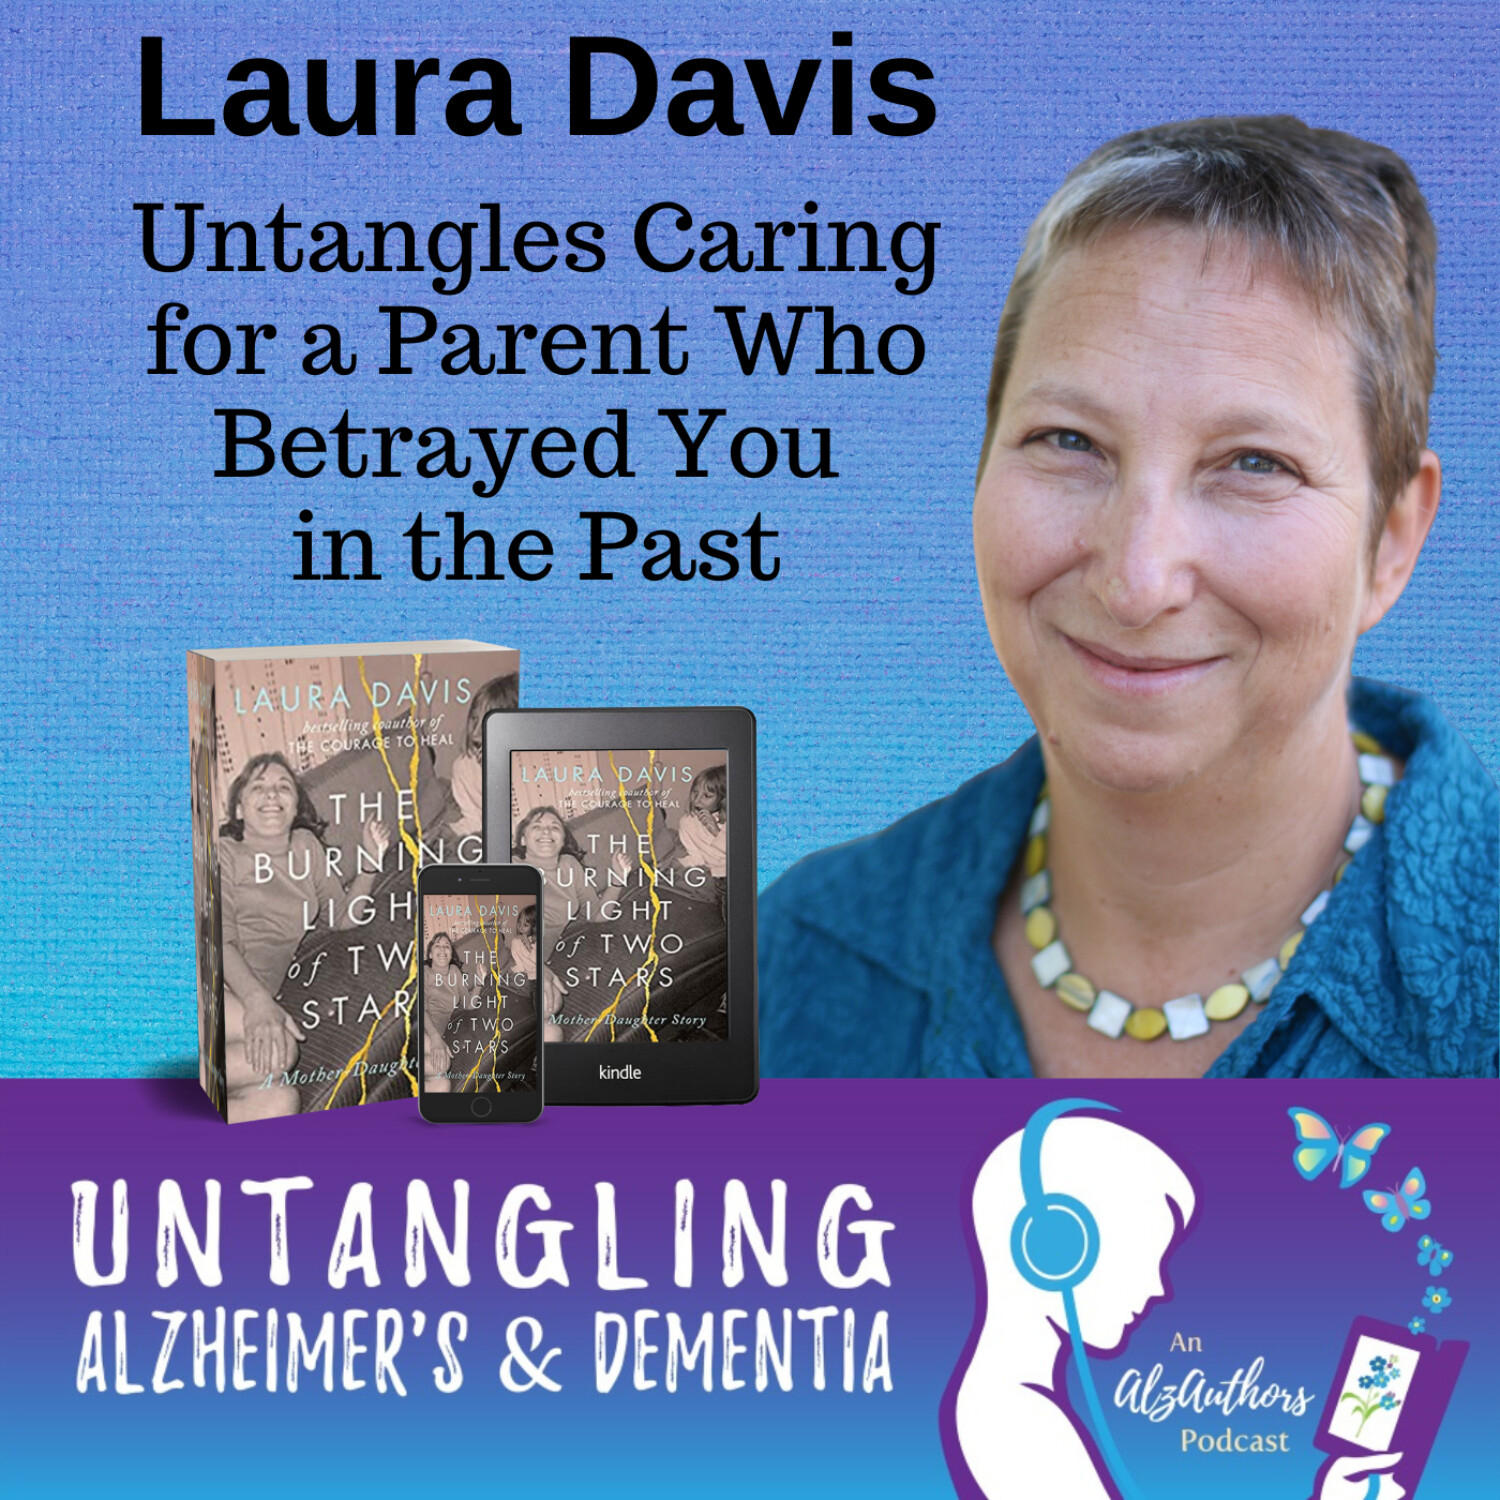 Laura Davis Untangles Caring for a Parent Who Betrayed You  in the Past